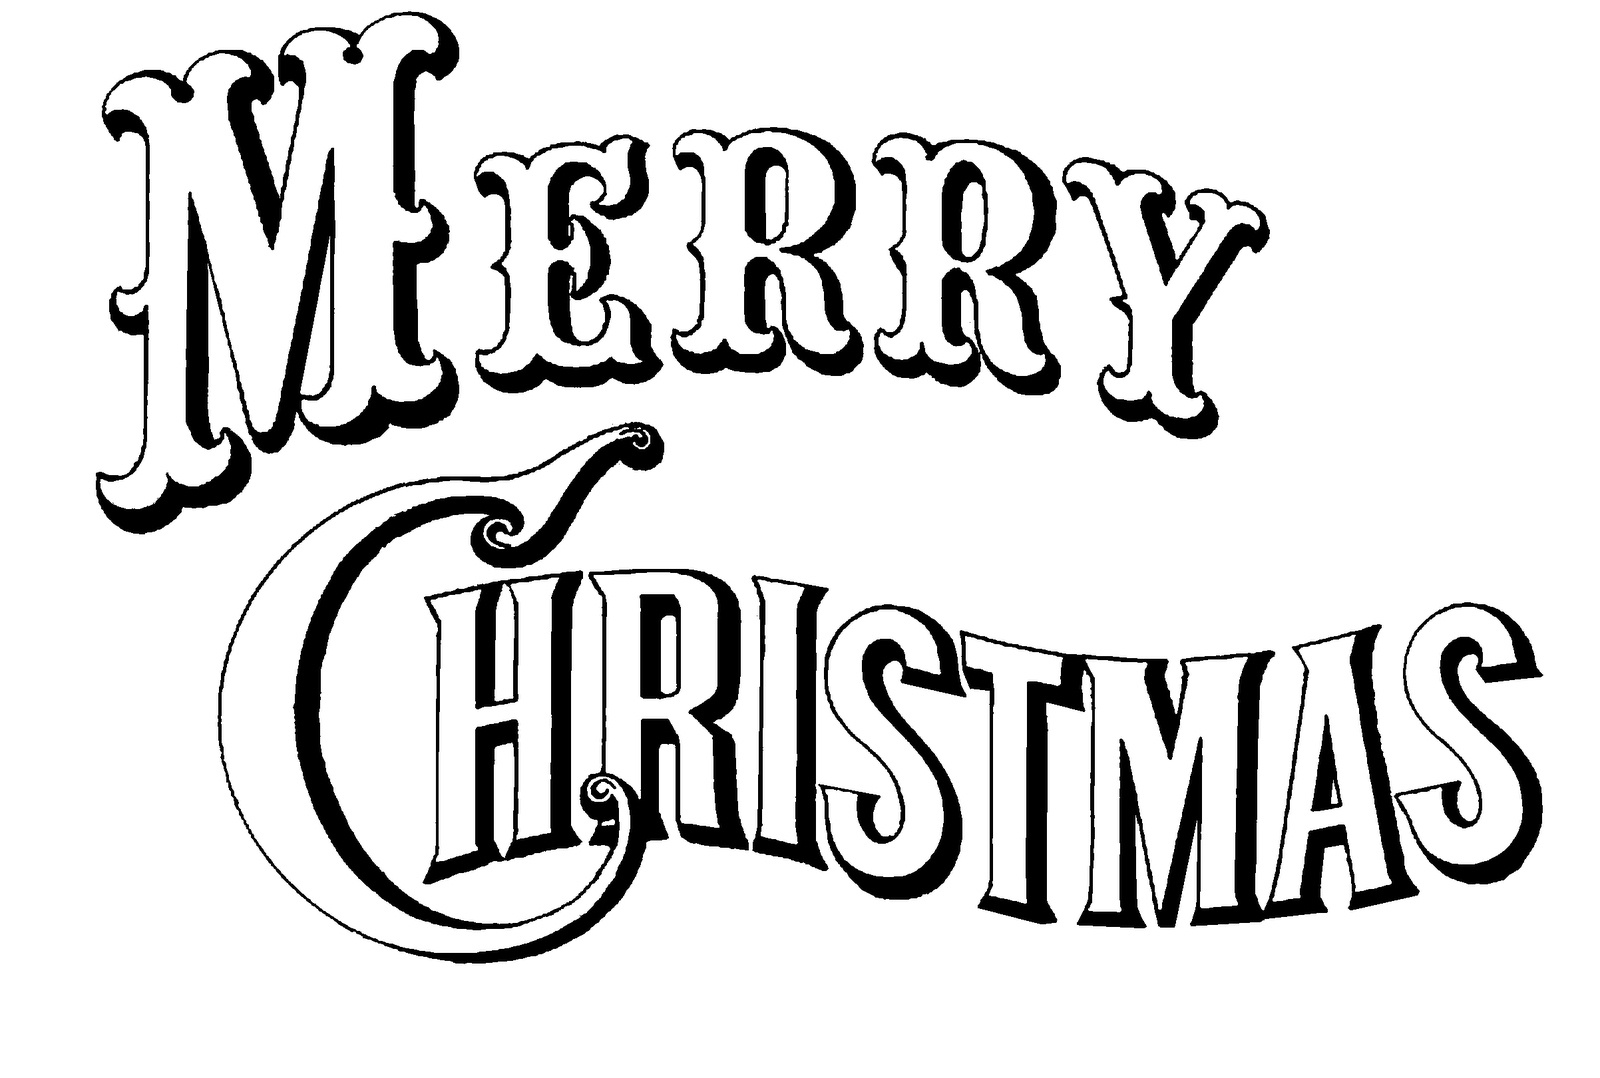 Merry Christmas Coloring Pages To Print - Free Printable Calendar - Merry Christmas Stencil Free Printable